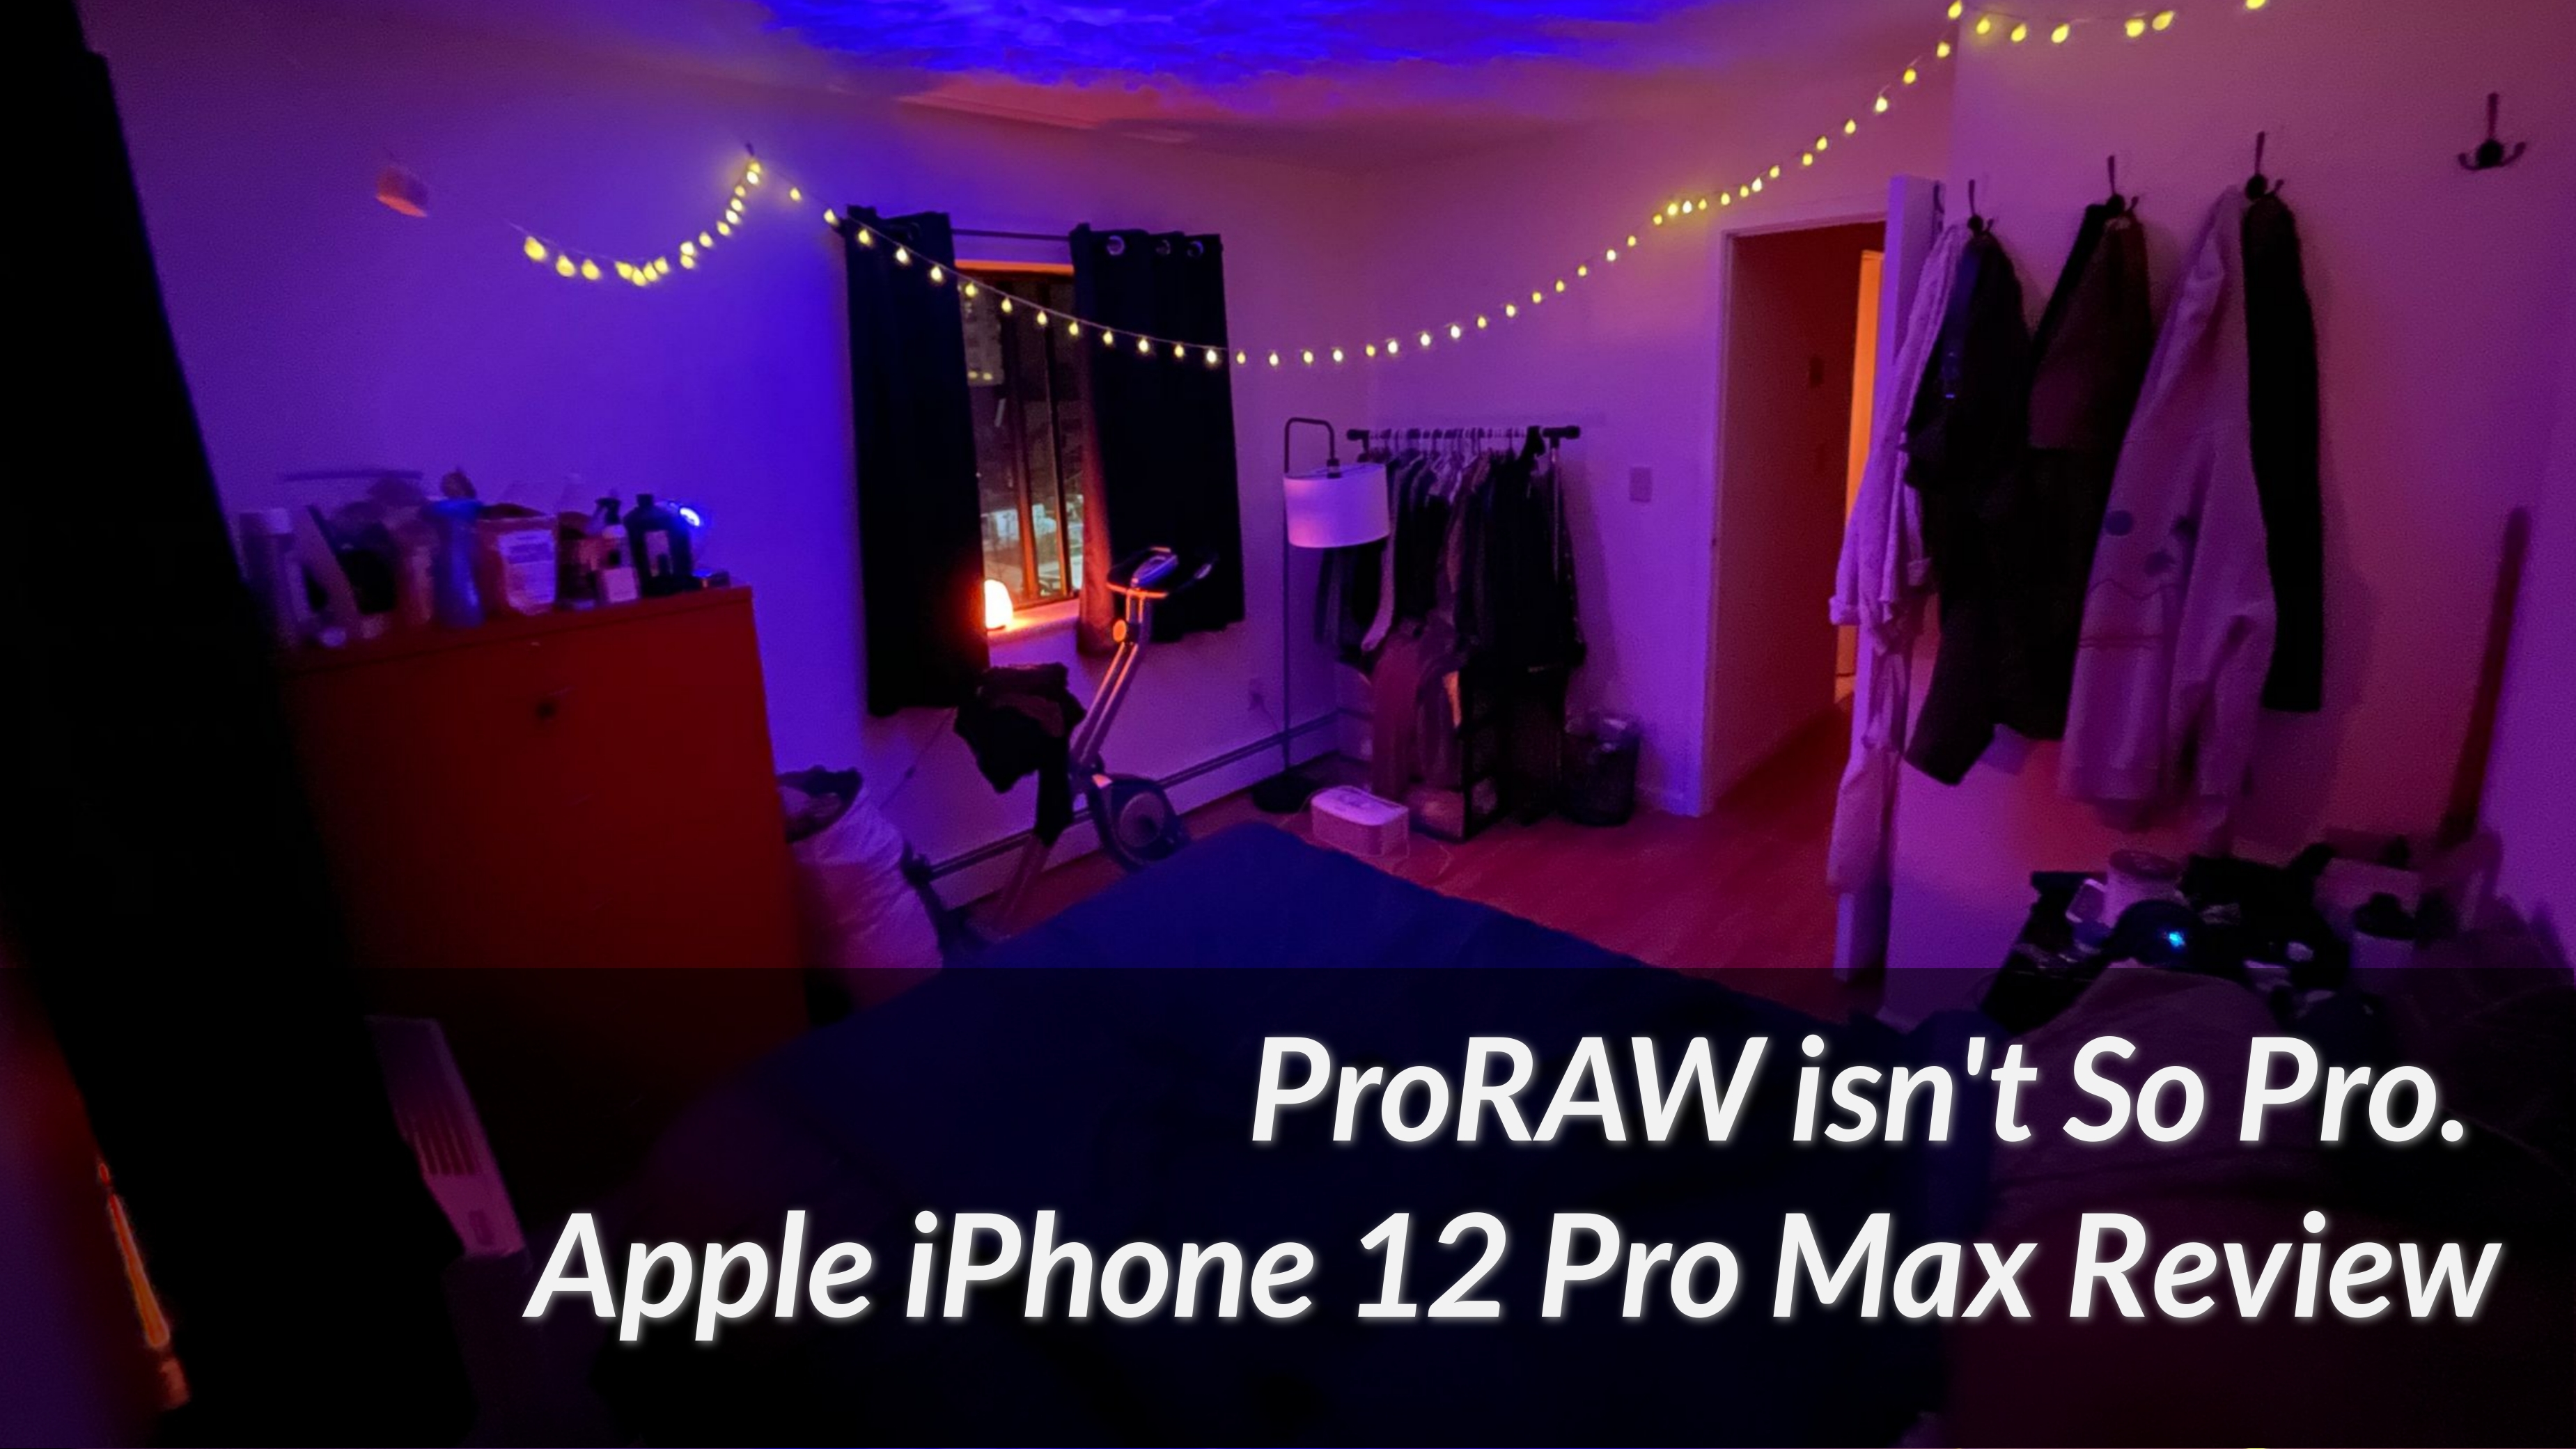 ProRAW-isnt-So-Pro.-Apple-iPhone-12-Pro-Max-Review-2